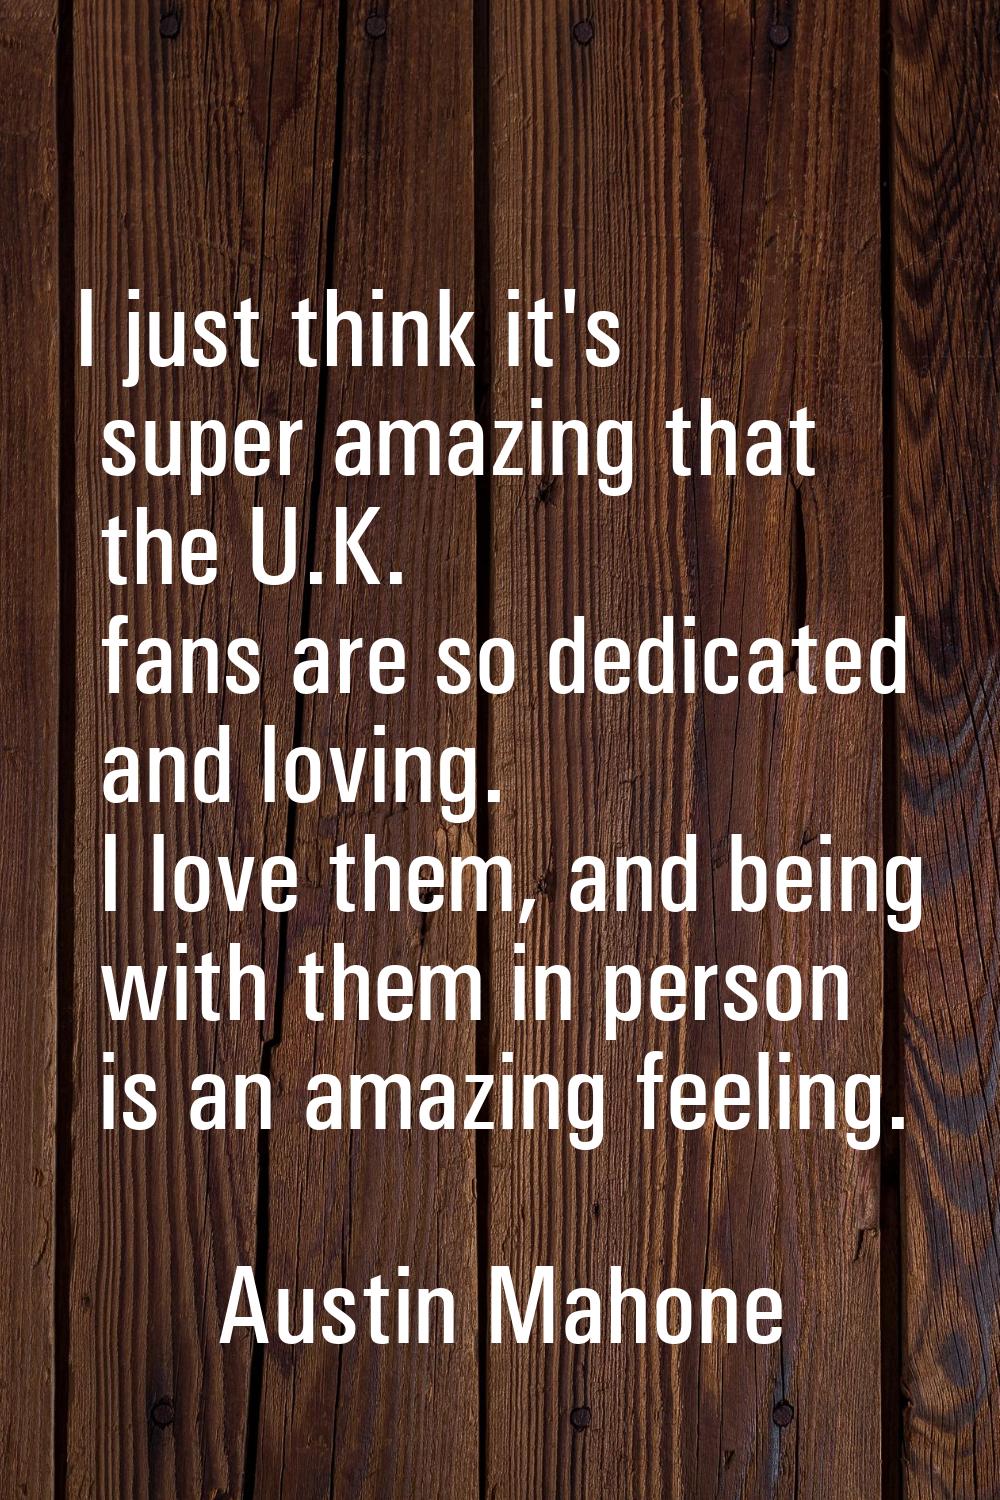 I just think it's super amazing that the U.K. fans are so dedicated and loving. I love them, and be